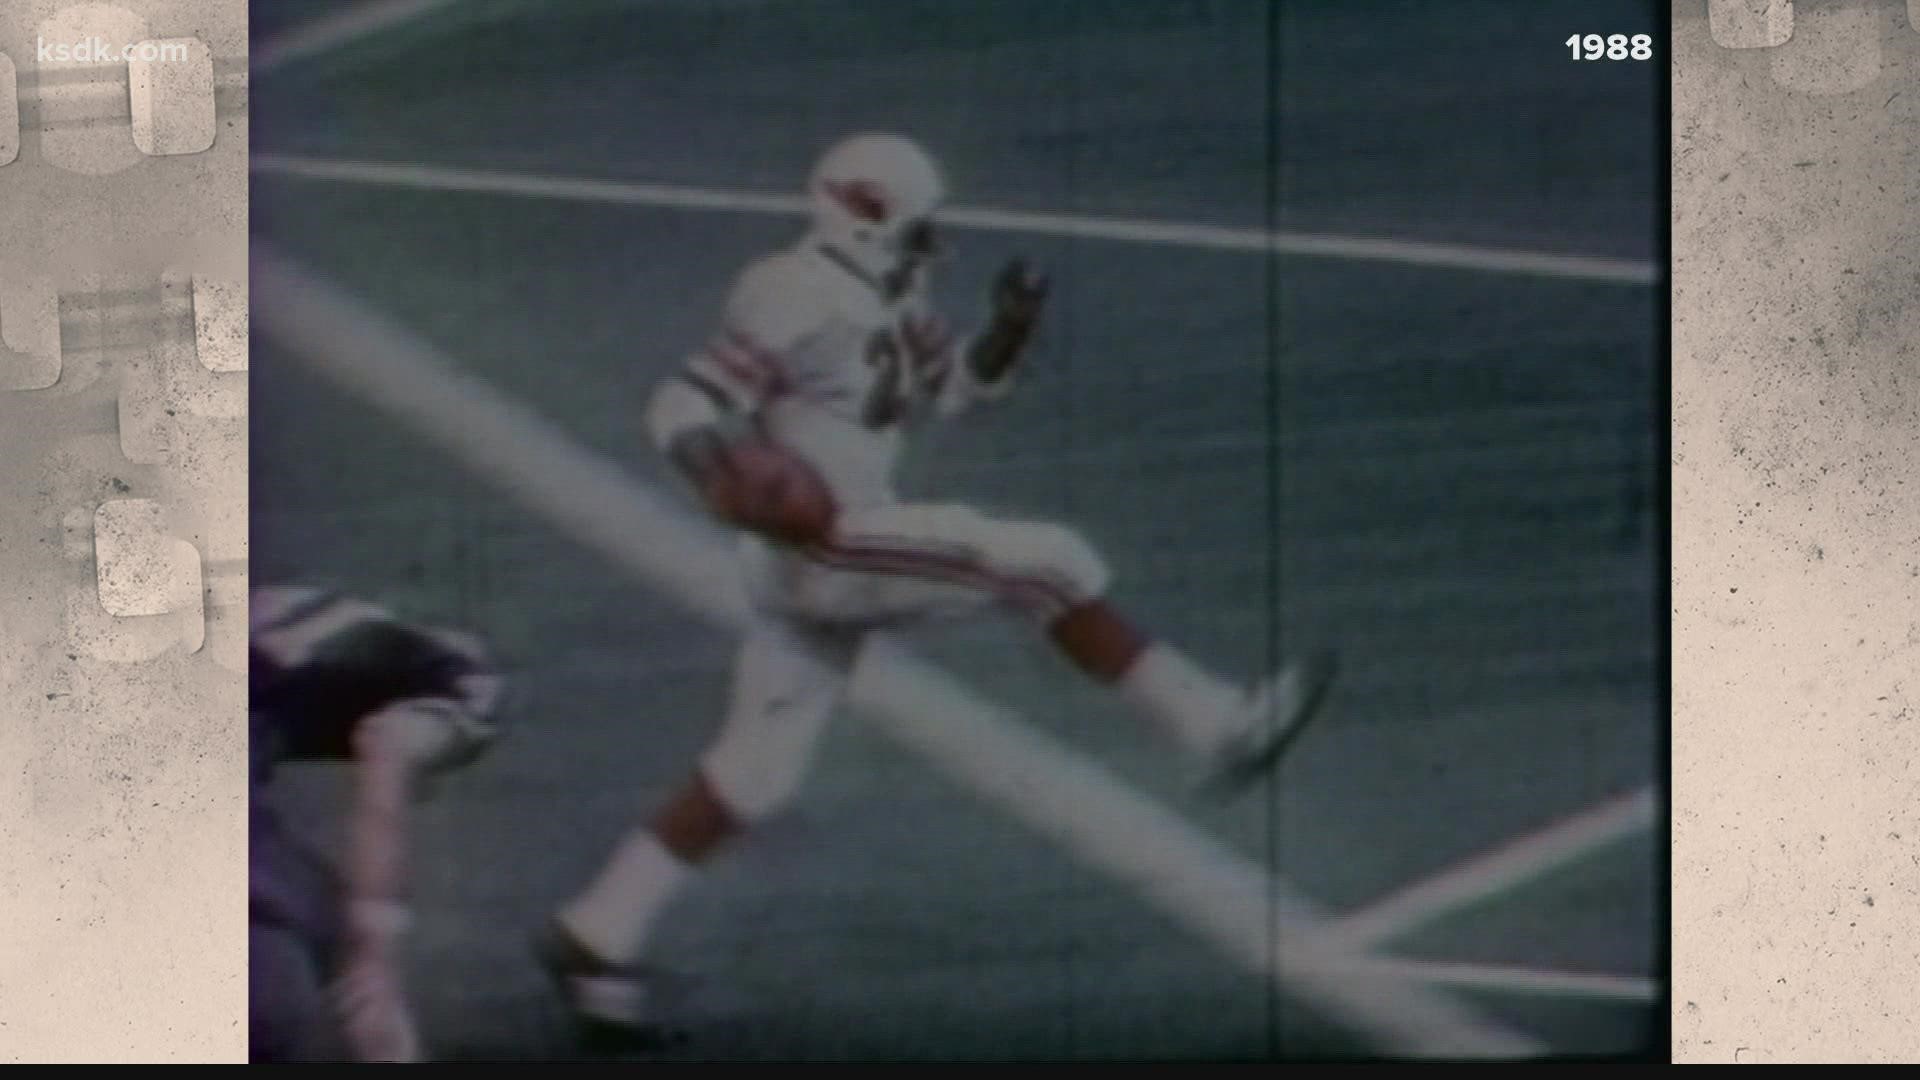 Vintage KSDK: The first time St. Louis lost an NFL team